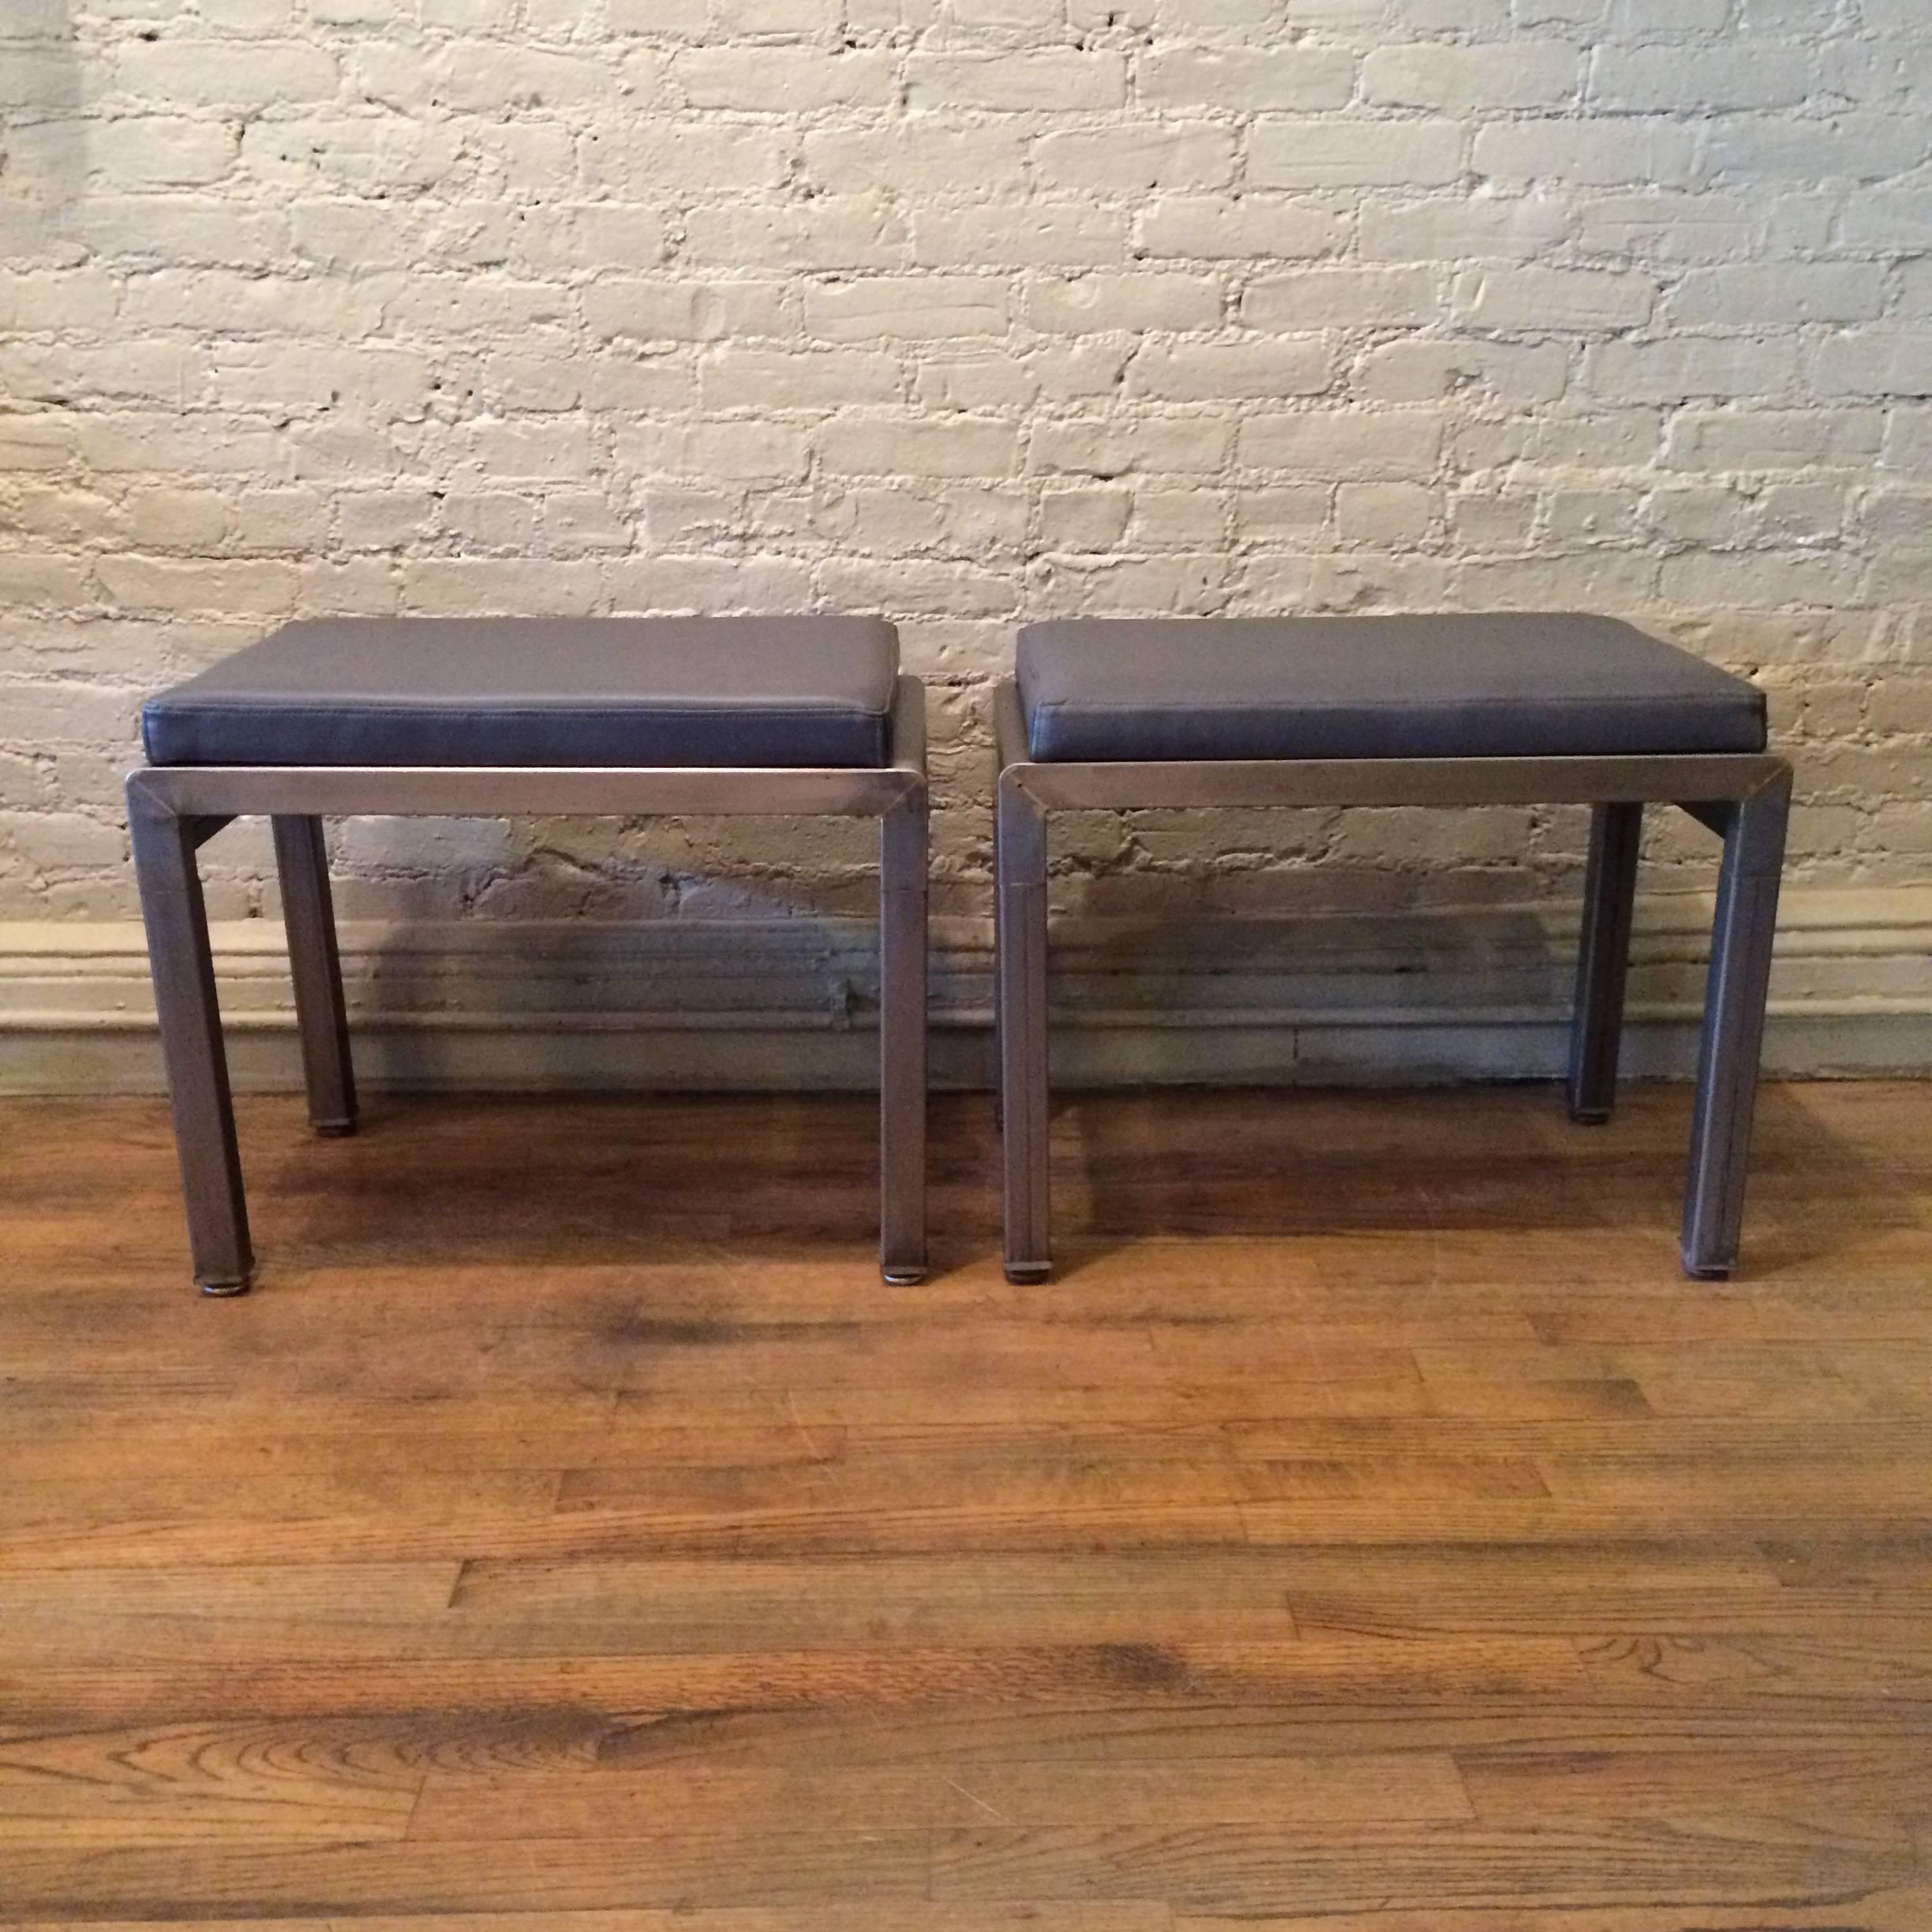 Pair of Art Deco ottomans or stools by Norman Bel Geddes for Simmons furniture company are brushed steel with re-upholstered gray vinyl tops.